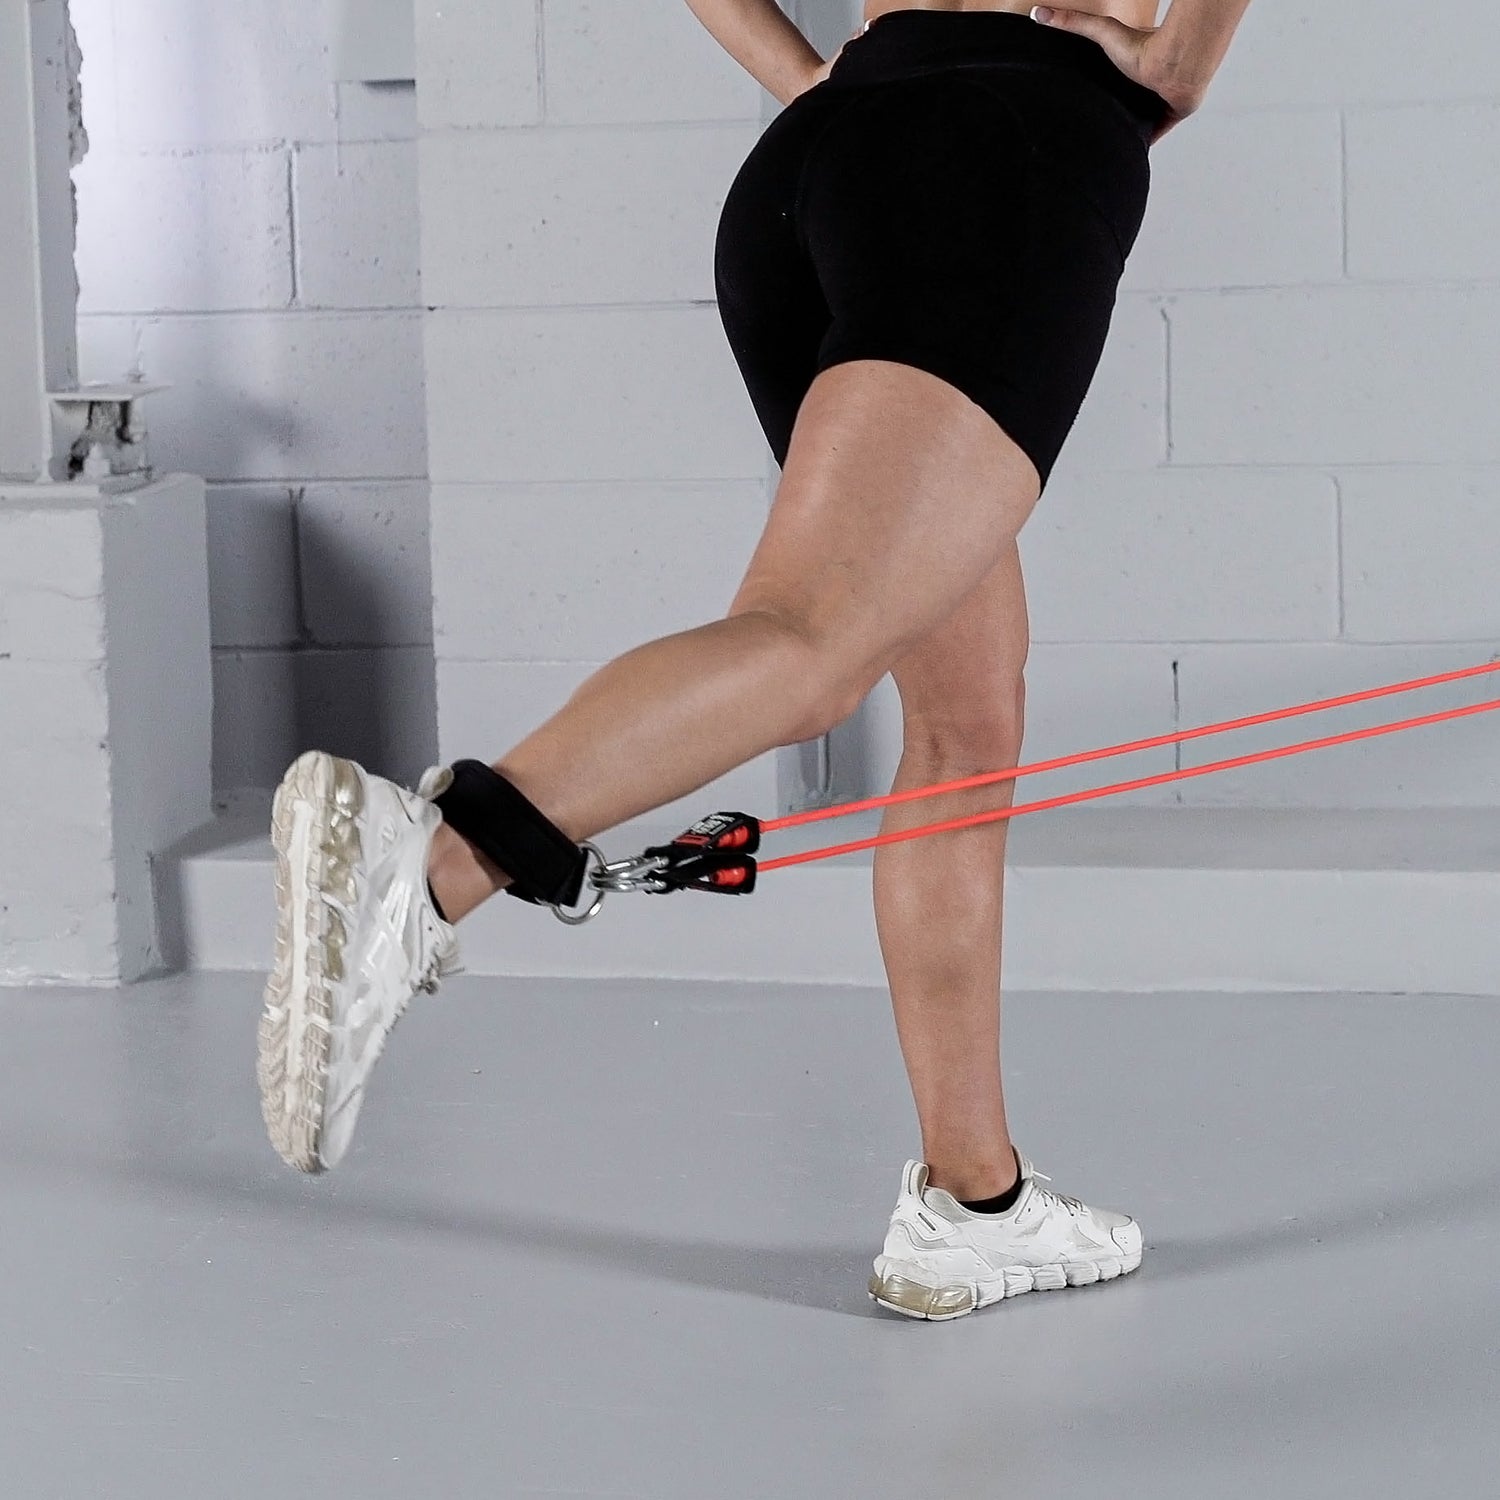 Reverse Leg Extension with the TRNR X31 Resistance System